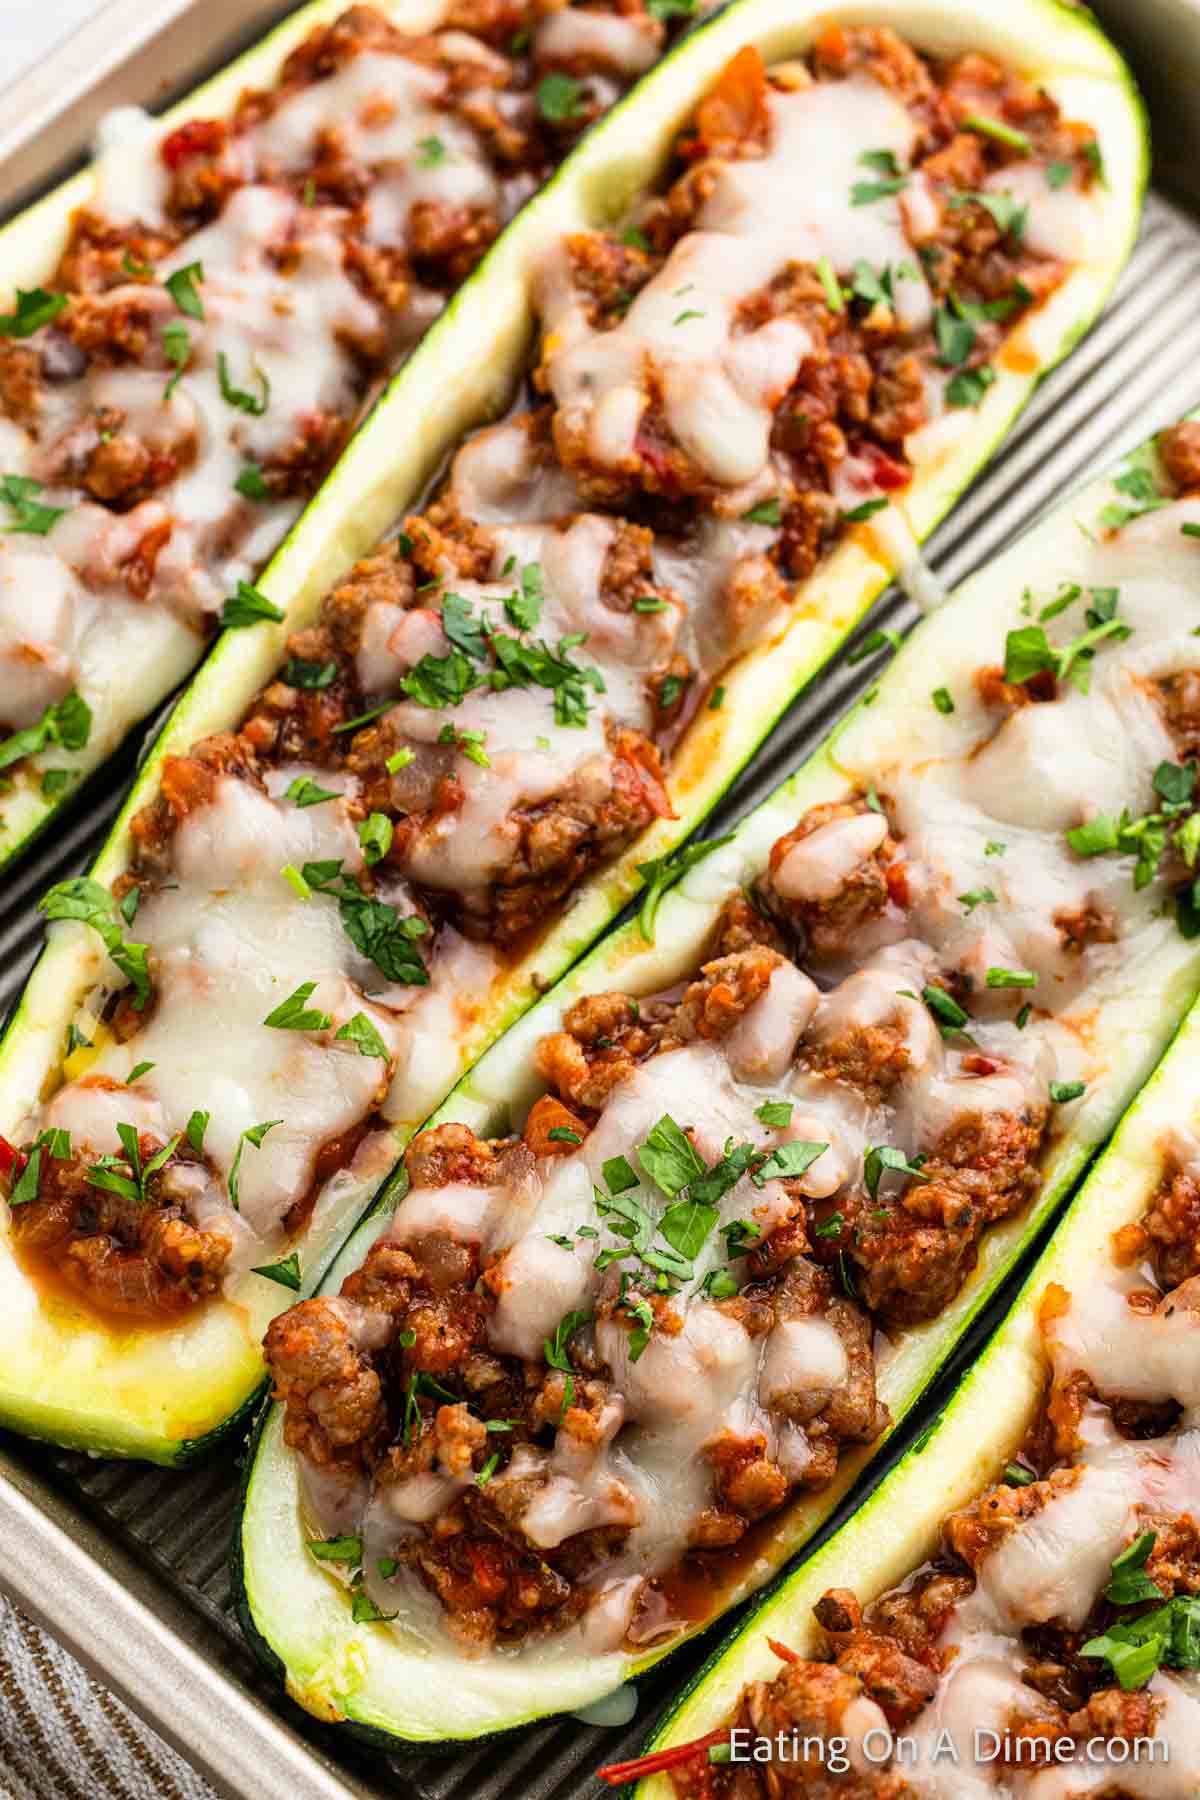 A close-up of zucchini boats stuffed with a savory ground meat and tomato mixture, topped with melted cheese and sprinkled with fresh chopped parsley. The stuffed zucchini boats recipe is beautifully arranged in a baking dish.